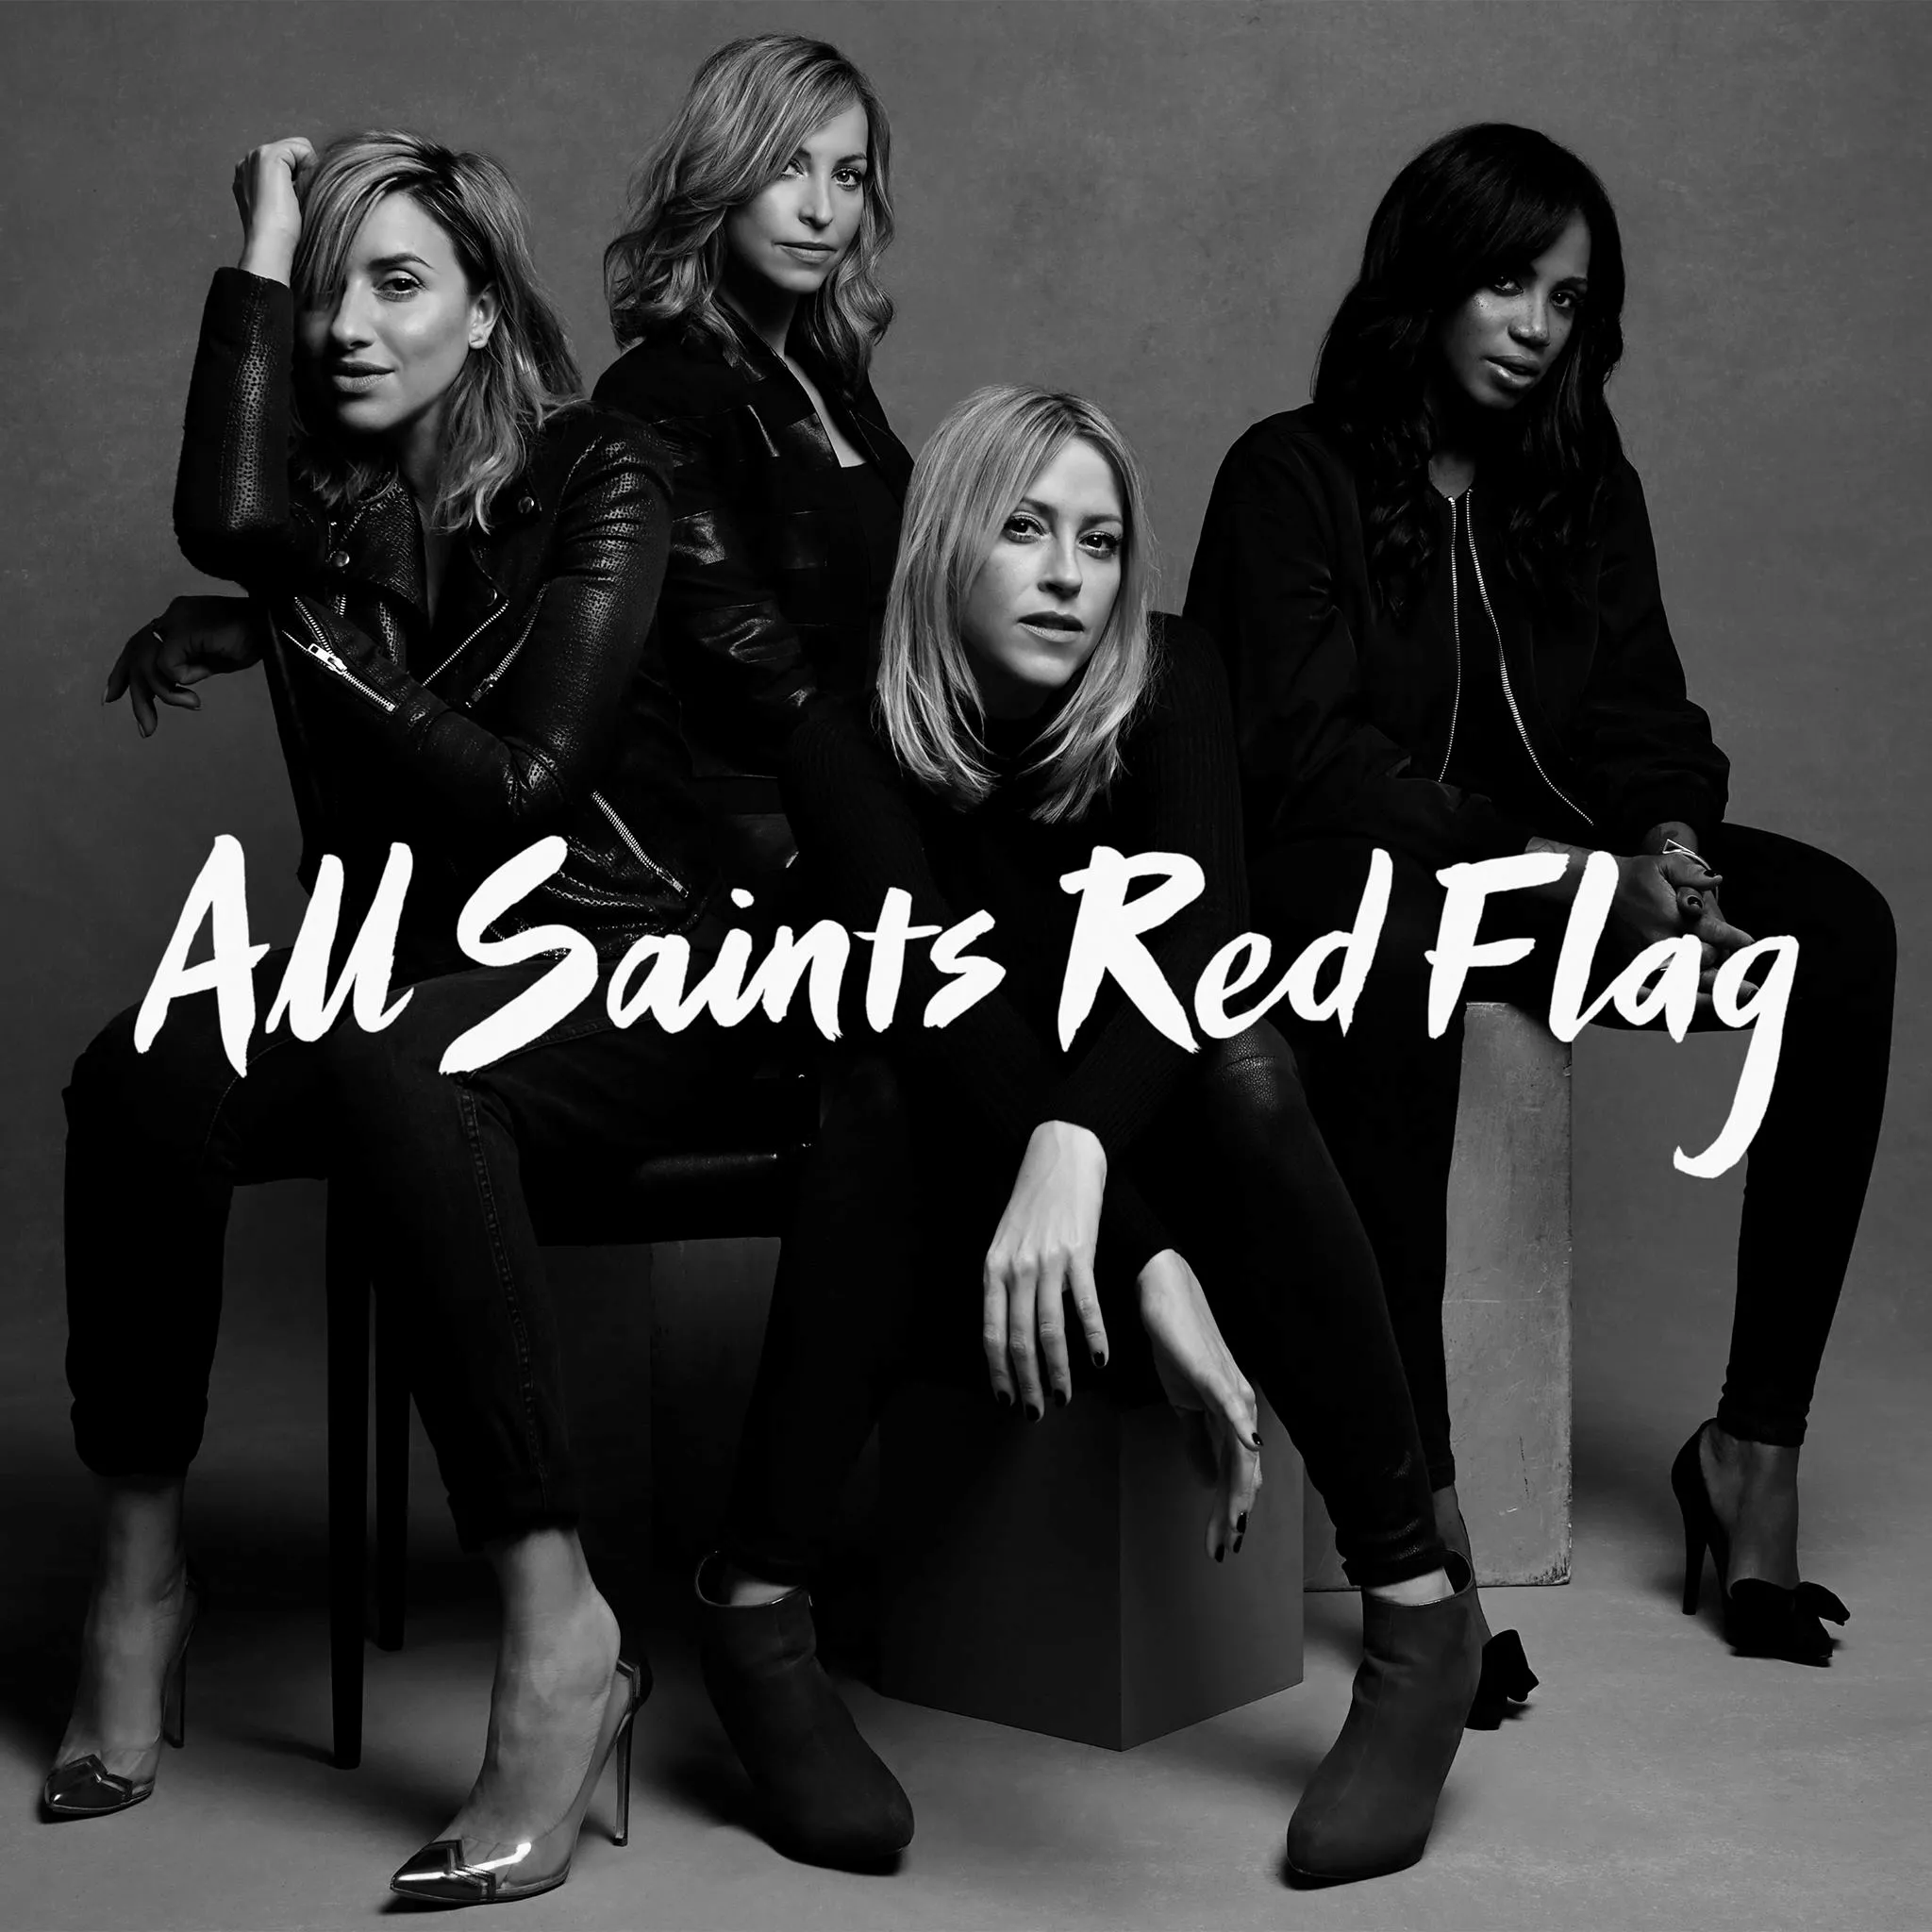 Red Flag - All Saints